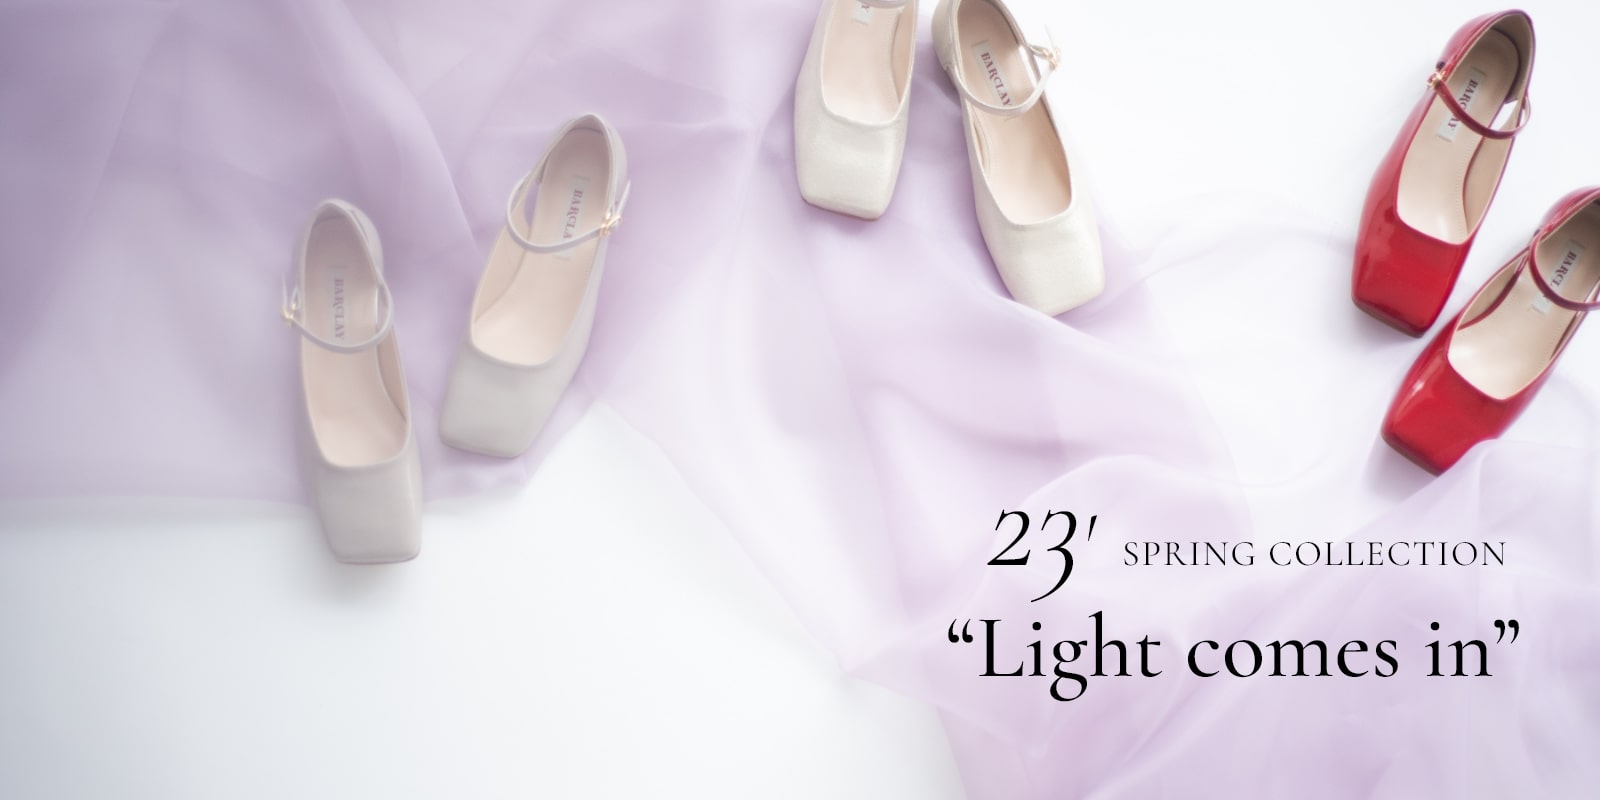 23' SPRING COLLECTION “Light comes in”